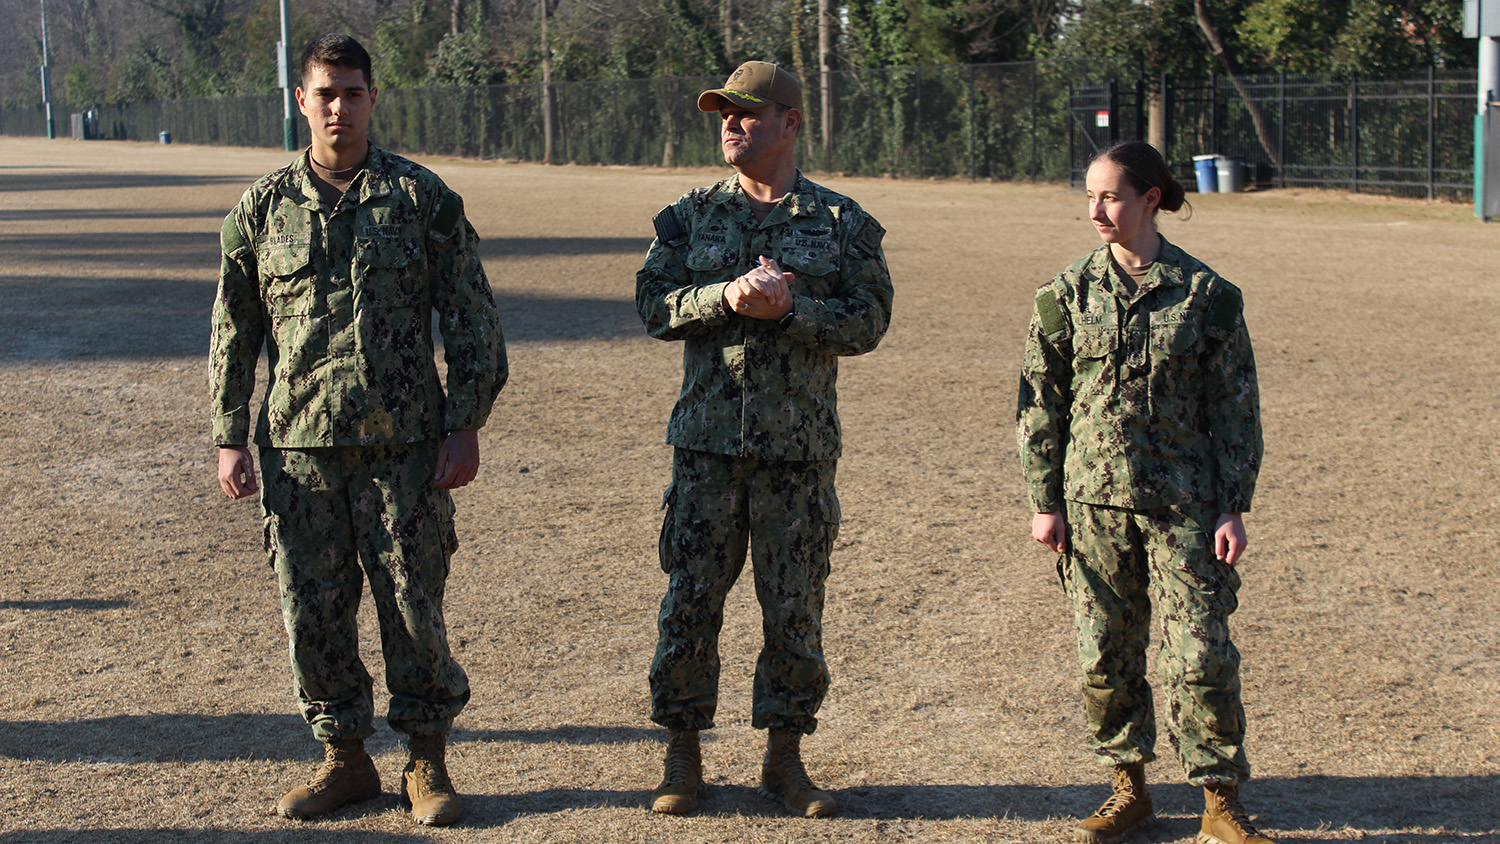 From left to right, Joaquin Blades, Captain Brian Tanaka and Natalie Wilhelm.